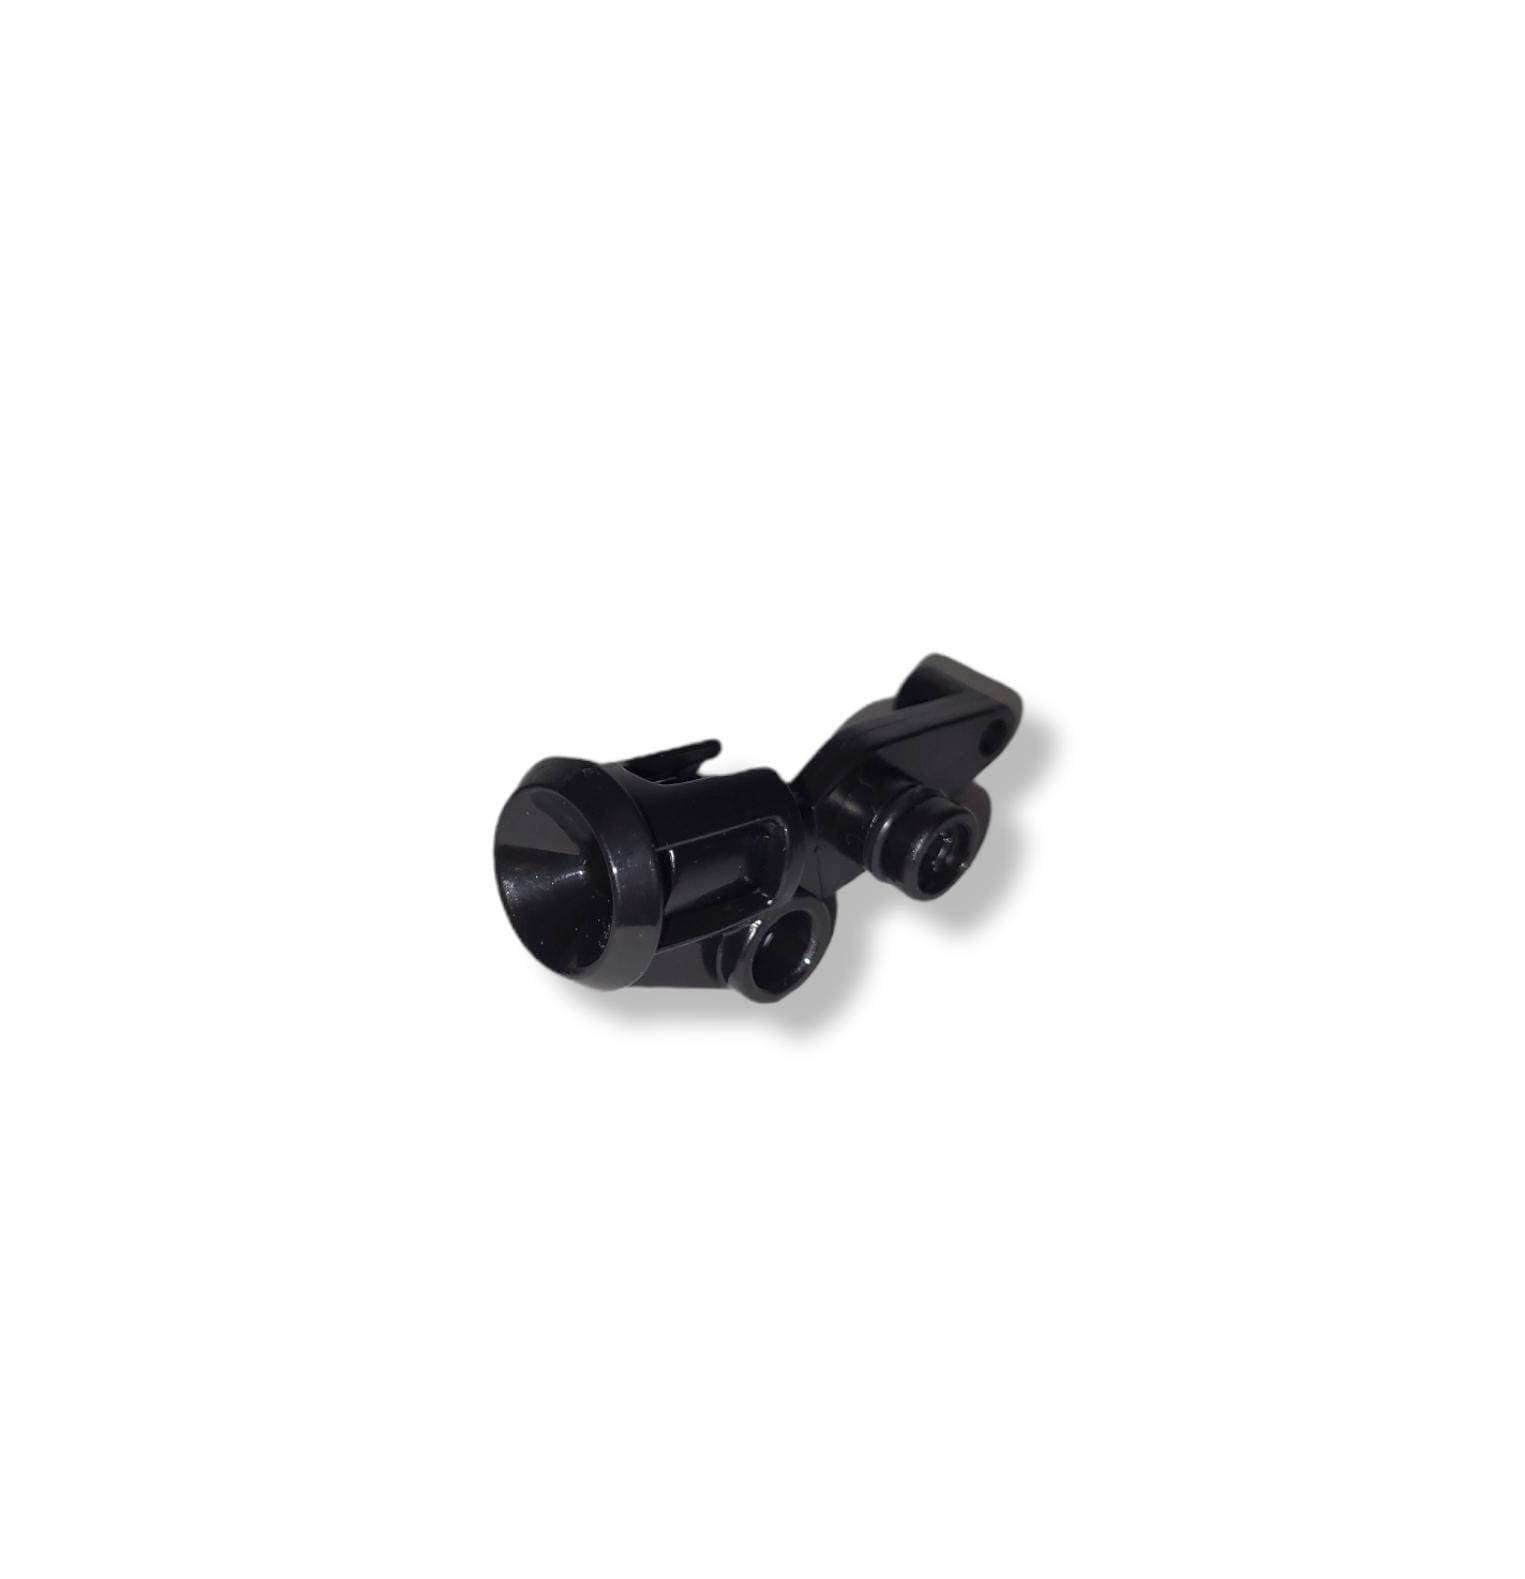 SAECO - BLK COF OUTLET SLEEVE BREW UNIT S0053 AS